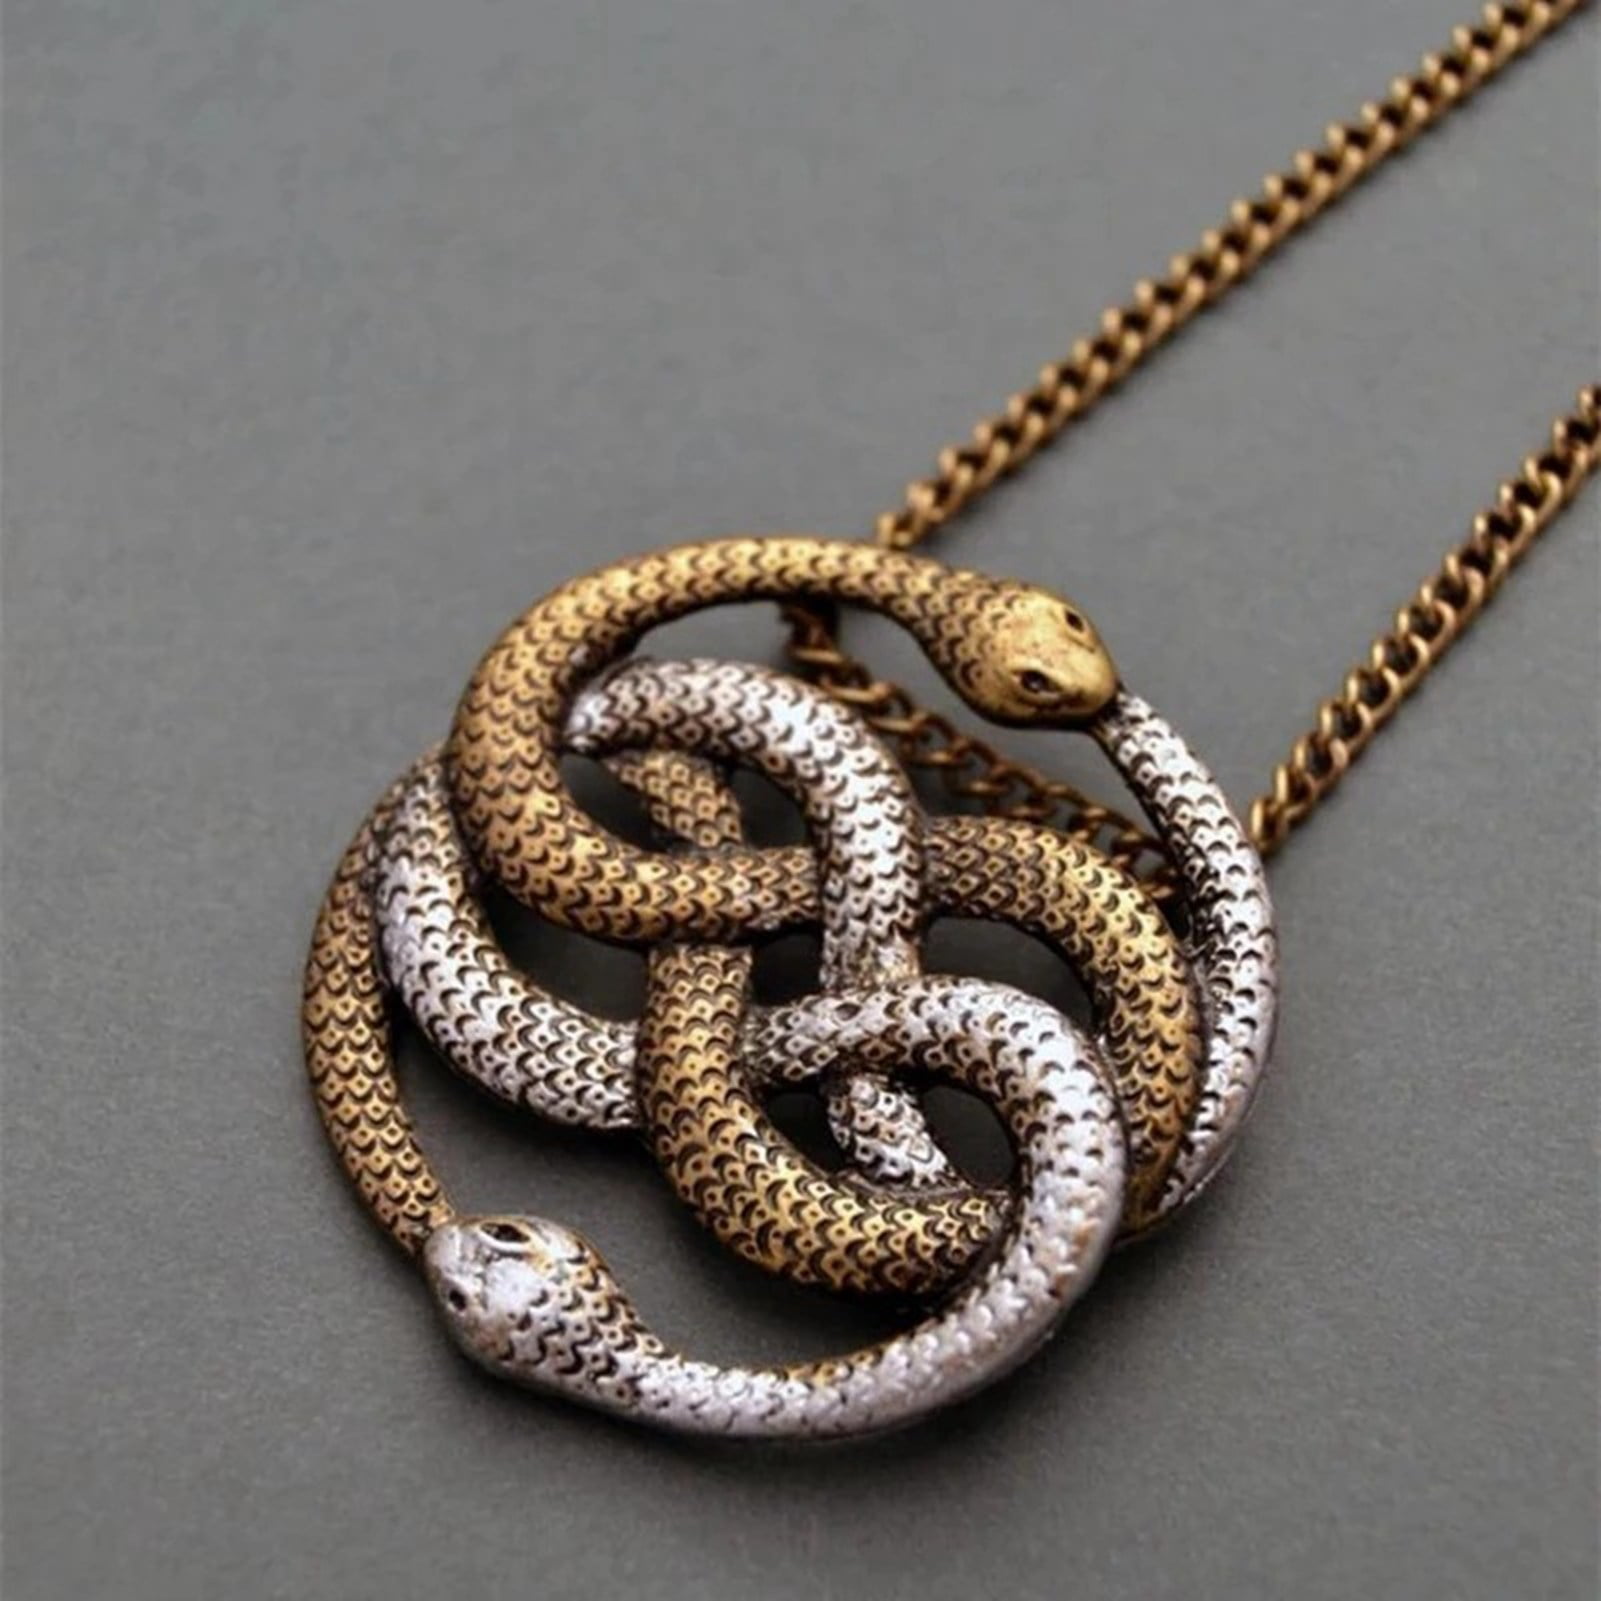 Auryn Necklace Neverending Story Jewelry Vivid Two Snakes Pendant Necklace  (Antique Bronze And Antique Silver Tone ) | SHEIN EUR